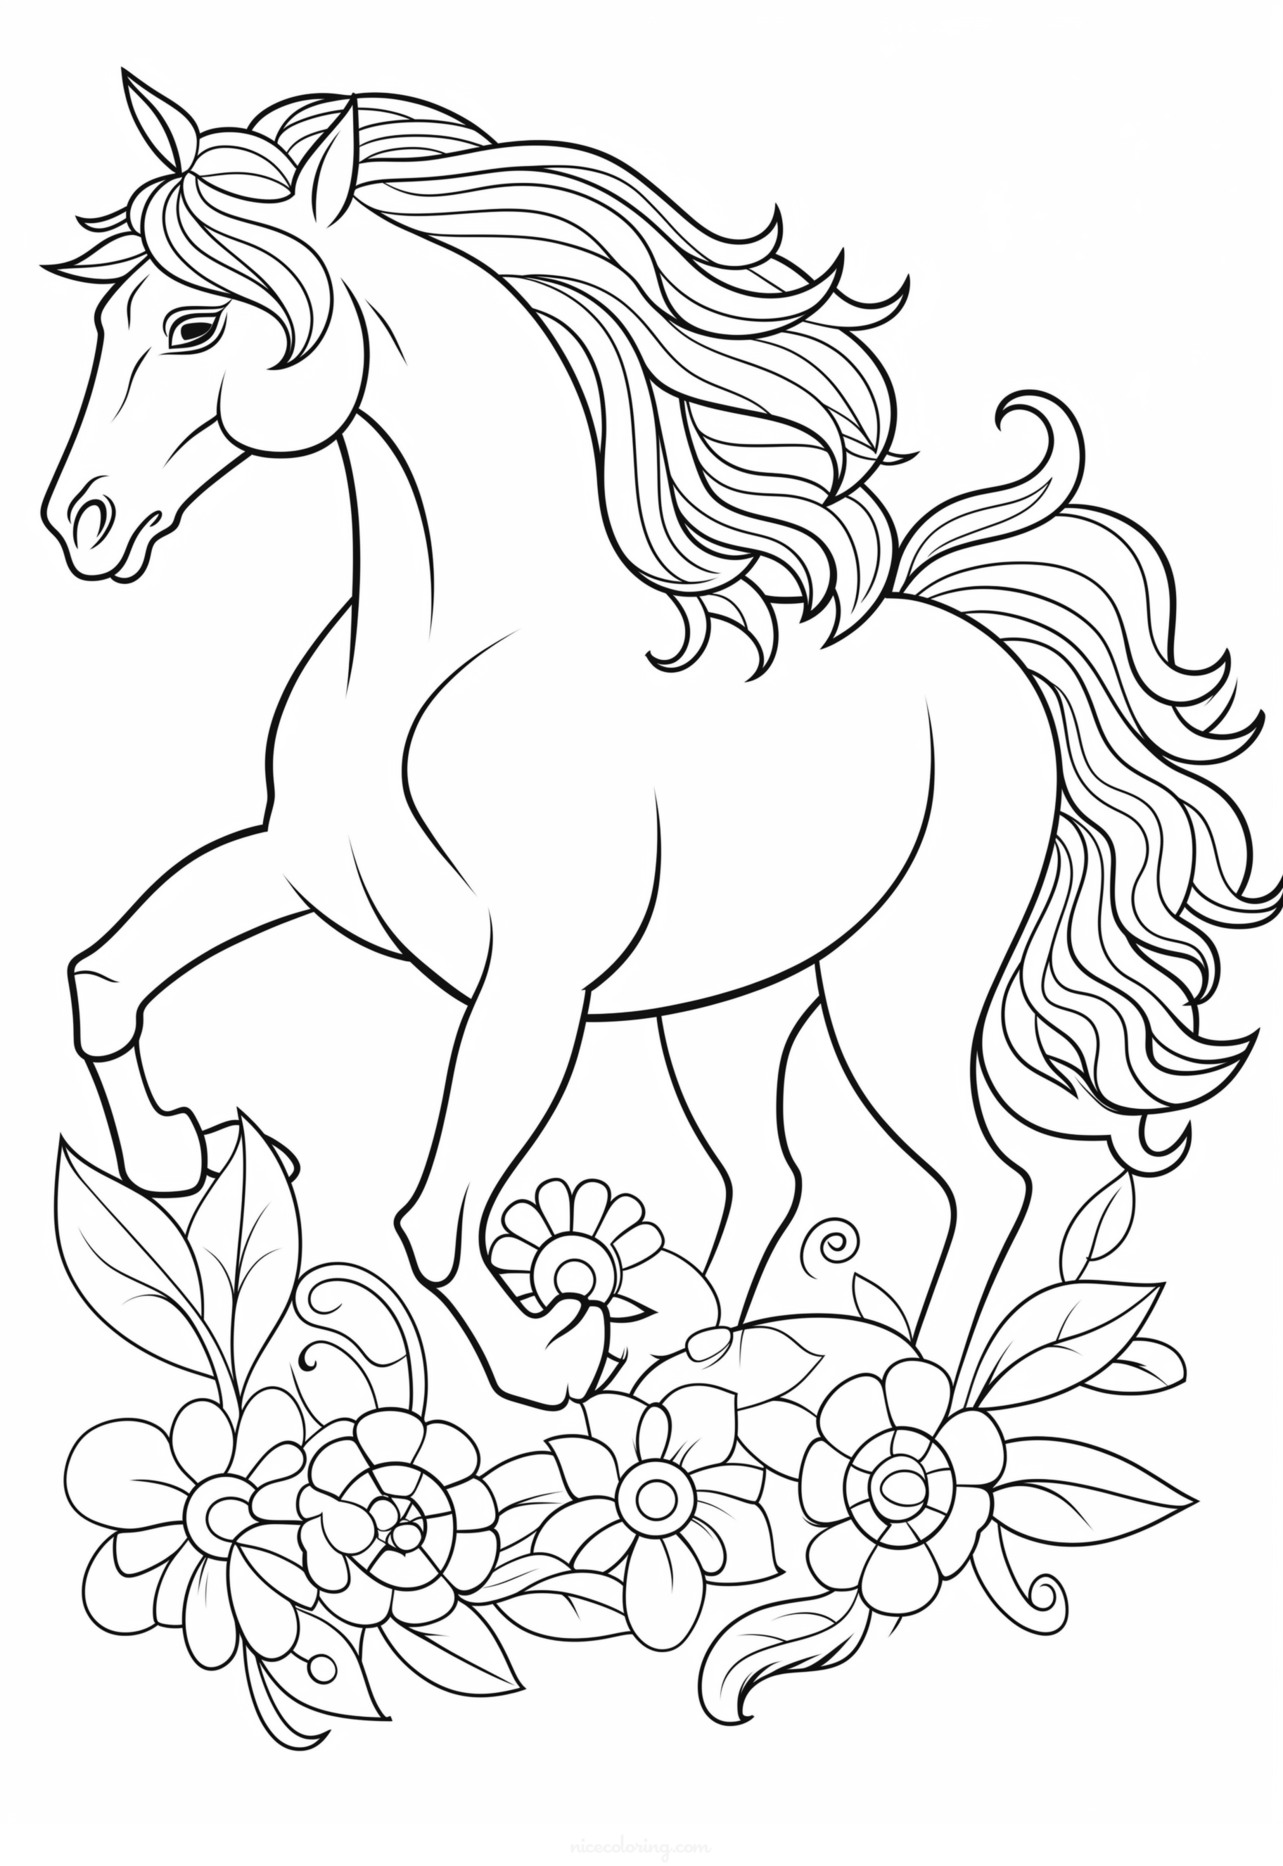 Horse galloping coloring page